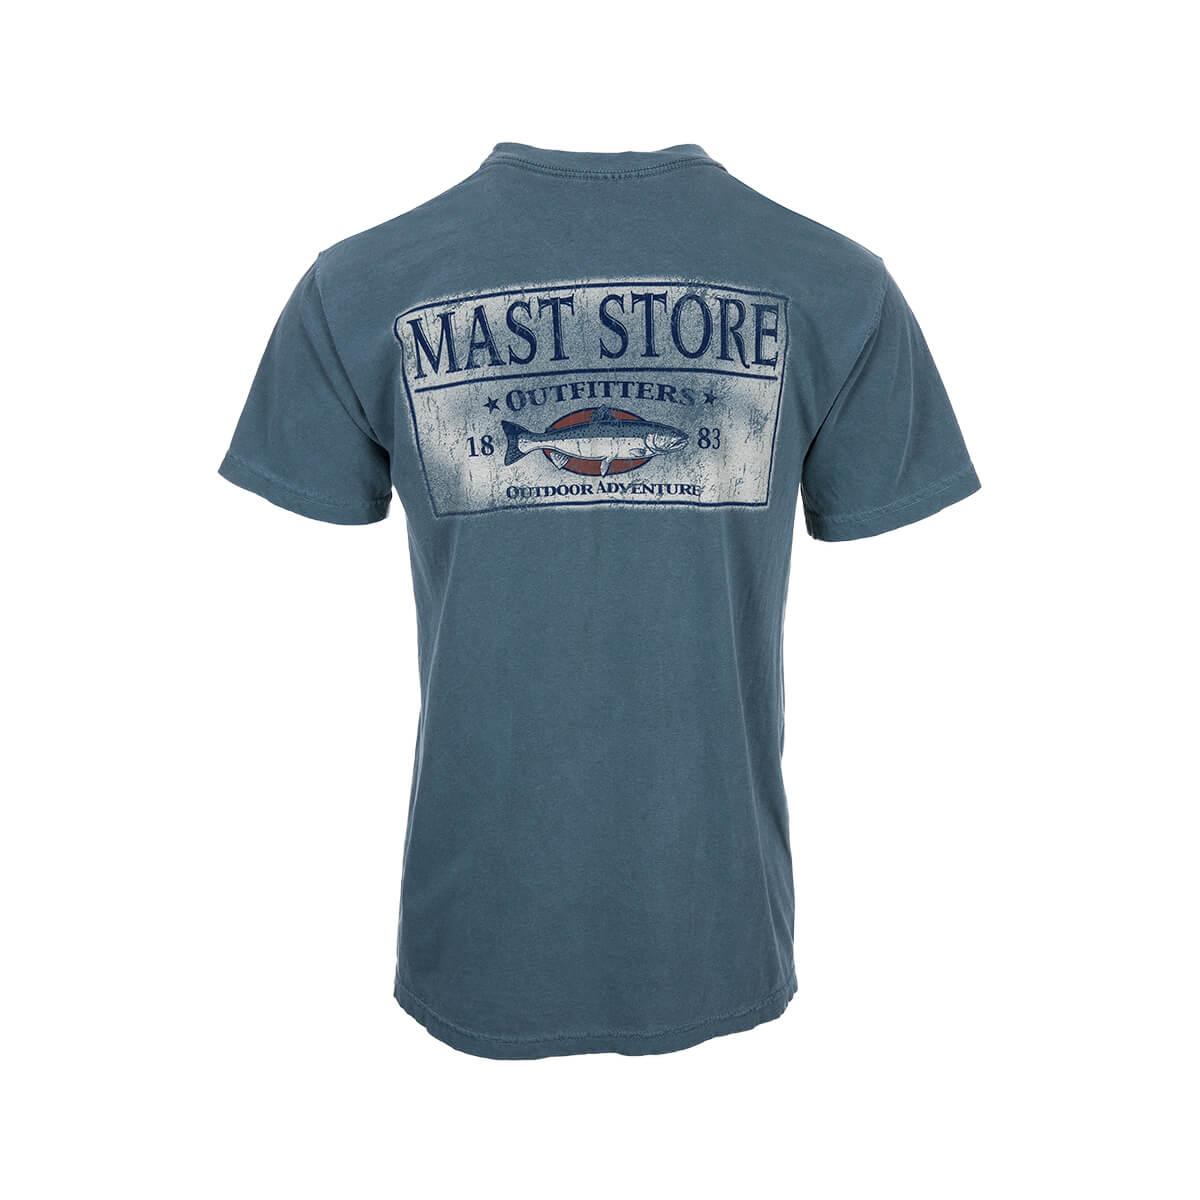  Mast Store Outfitters Trout T- Shirt